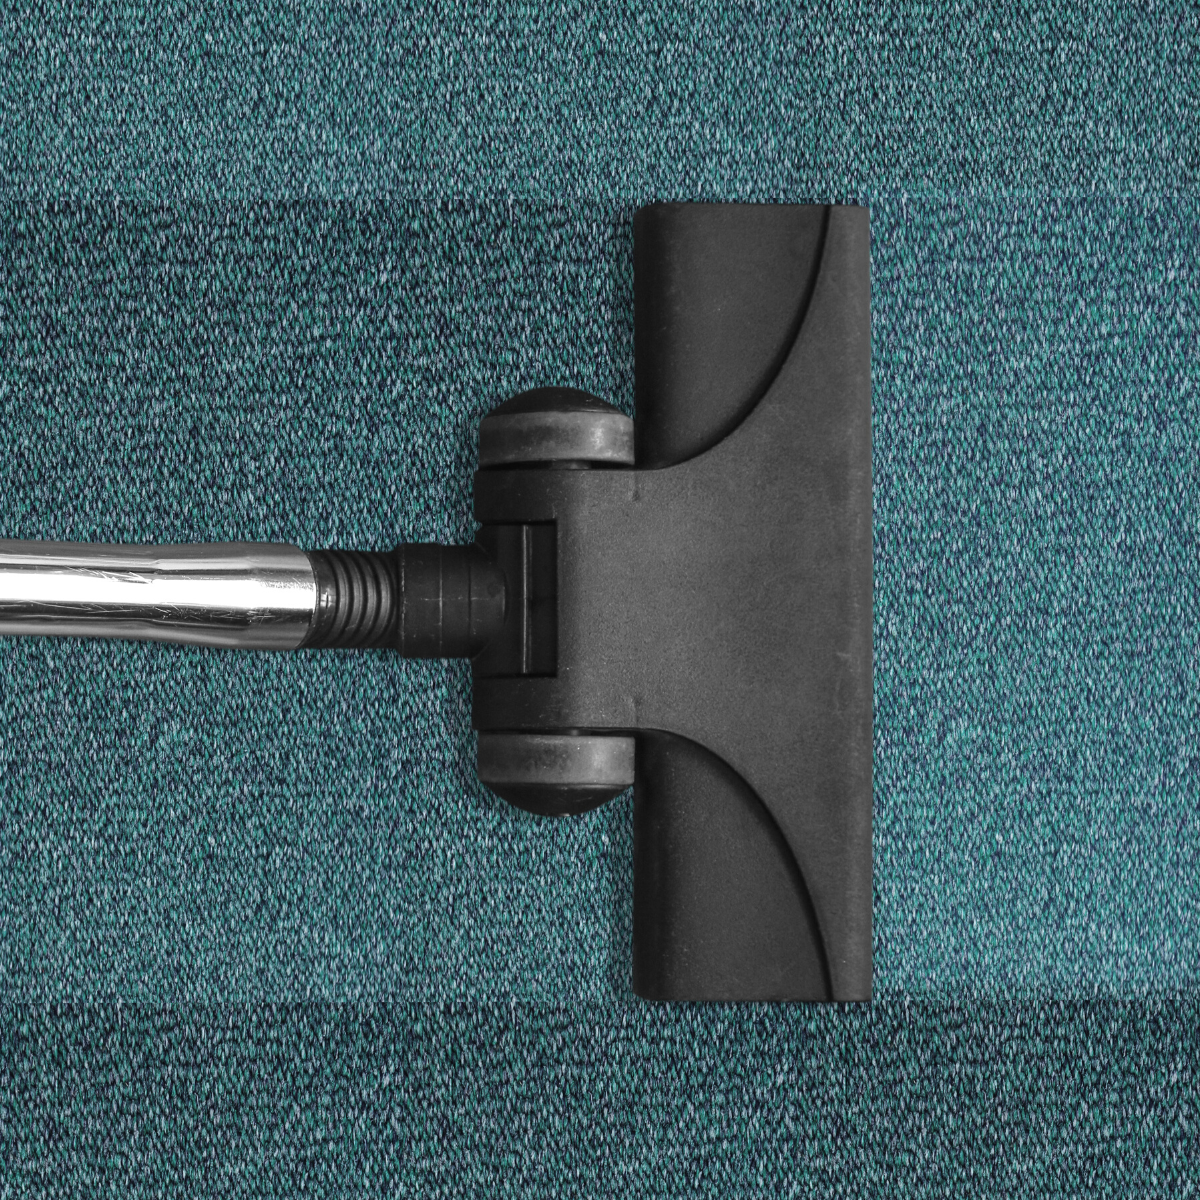 How often should you deep clean your office carpets?